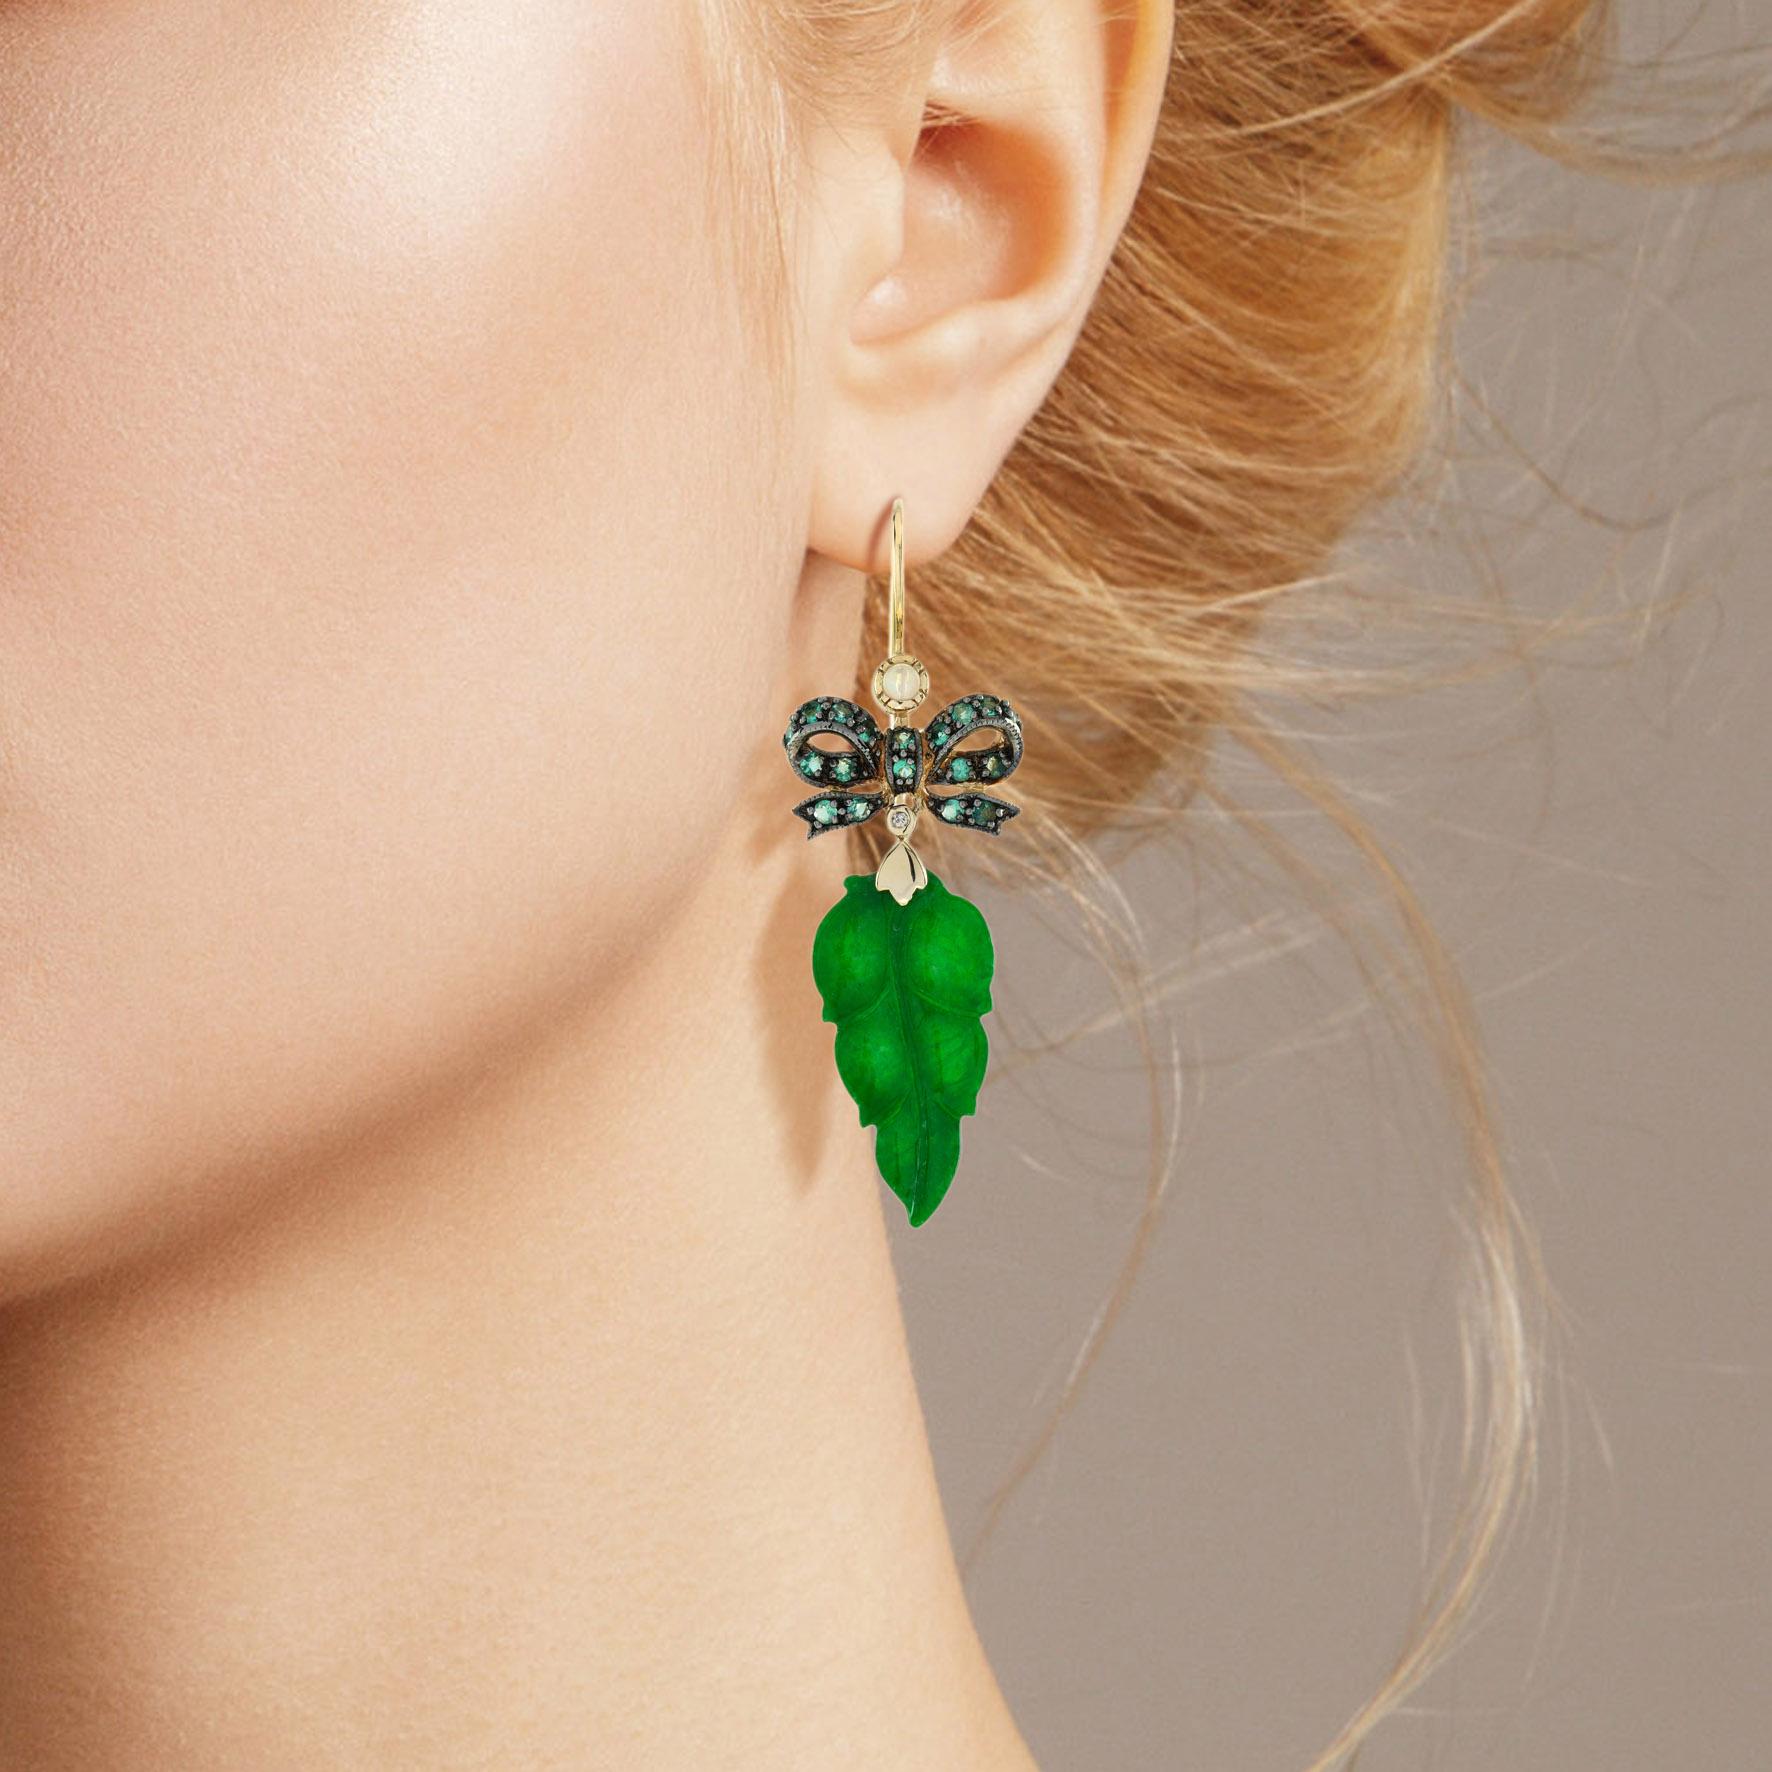 The natural jade in these lovely earrings has some very special shape. Both pieces have a strong green color and well leaf carvings. The jade is suspended in a 9k yellow gold setting with emerald ribbon bow on the top. The earrings transfer their